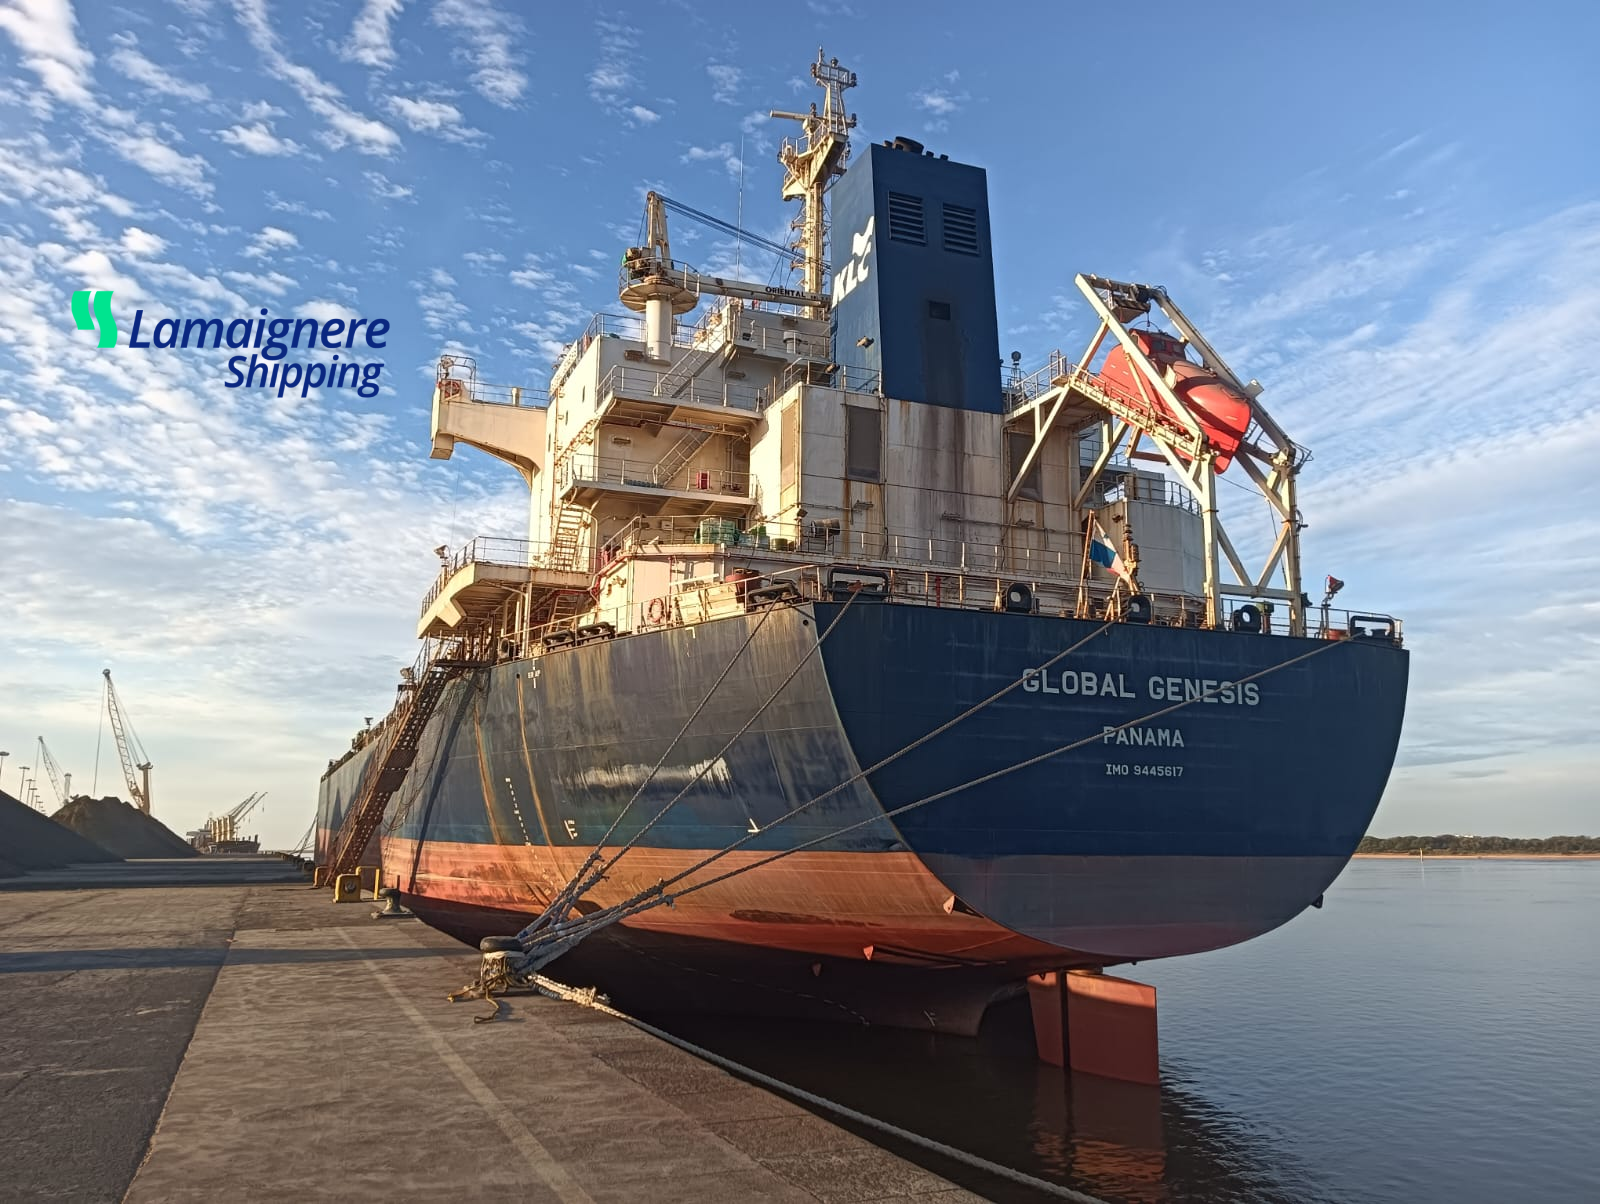 Lamaignere Shipping coordinates the unloading of clinker at the Port of Huelva with the vessel Global Genesis